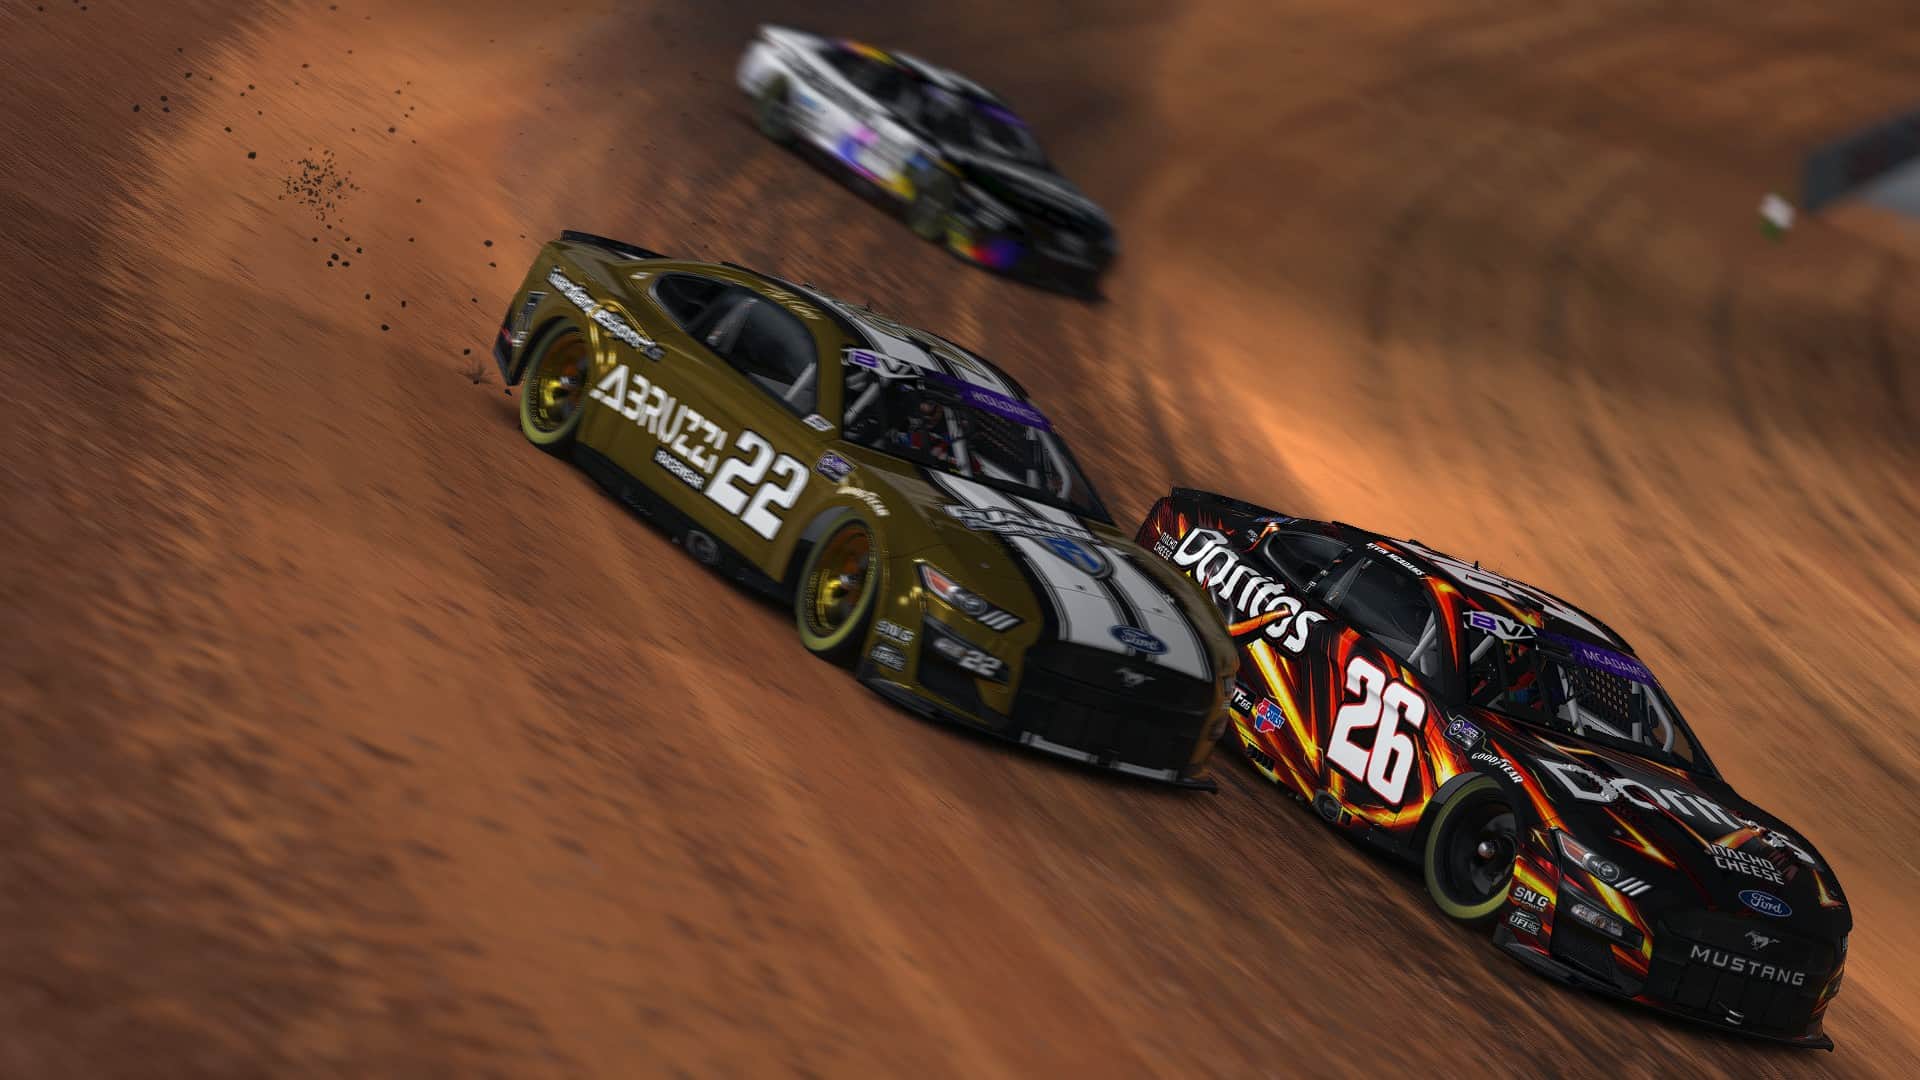 iRacing 2022 Season 2 Patch 2 updates Bristol Dirt Track to new specifications